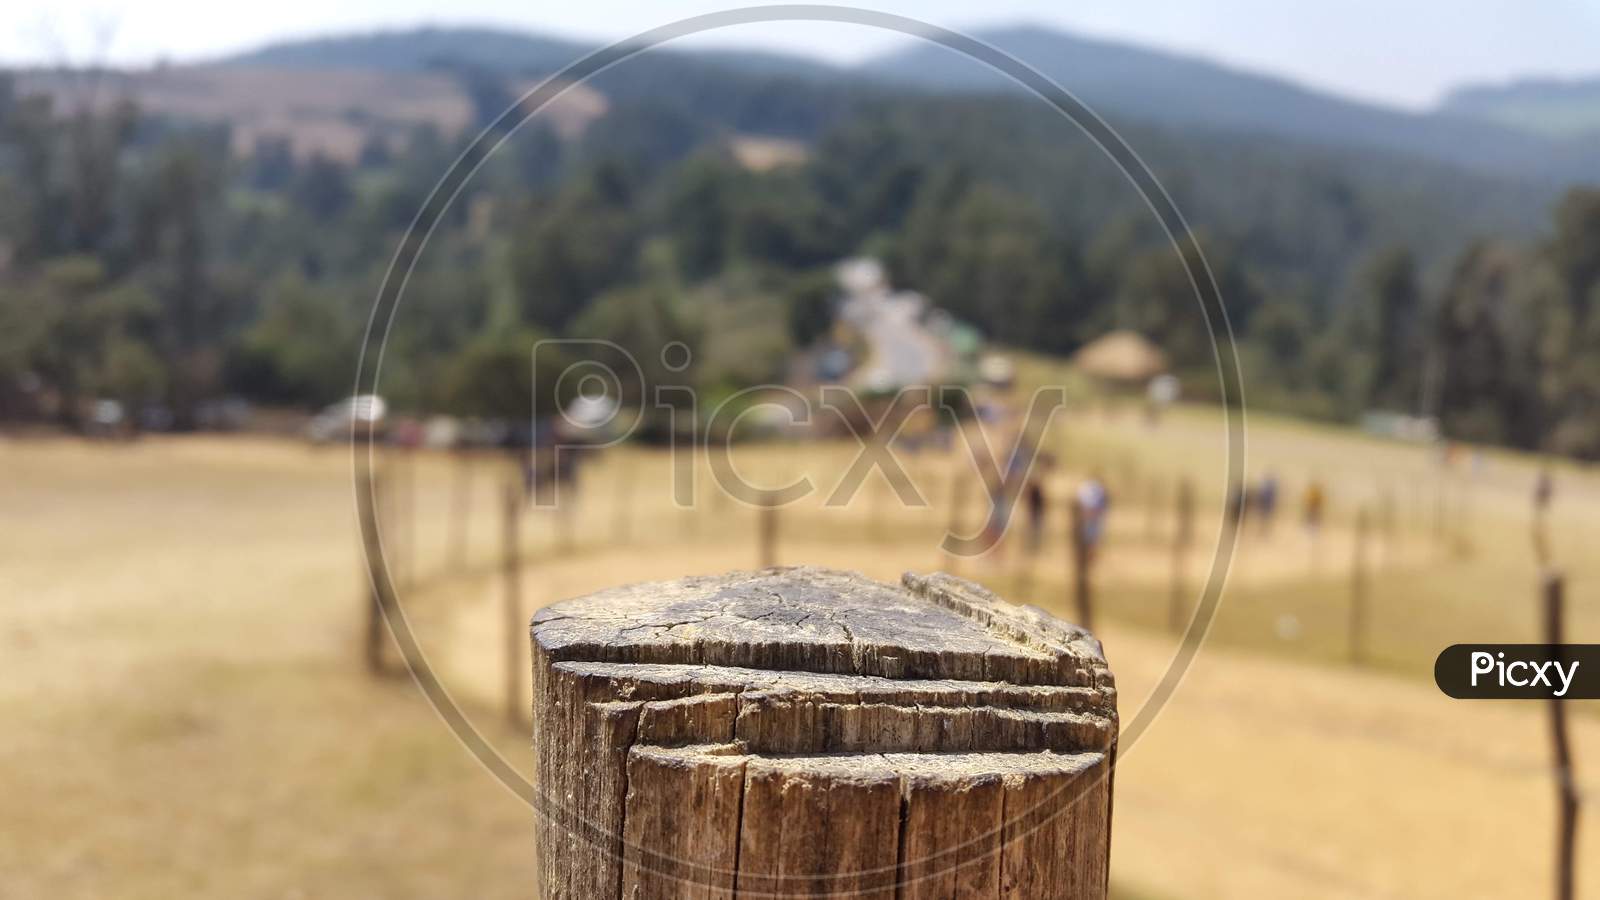 The pole and mountains in Bokeh